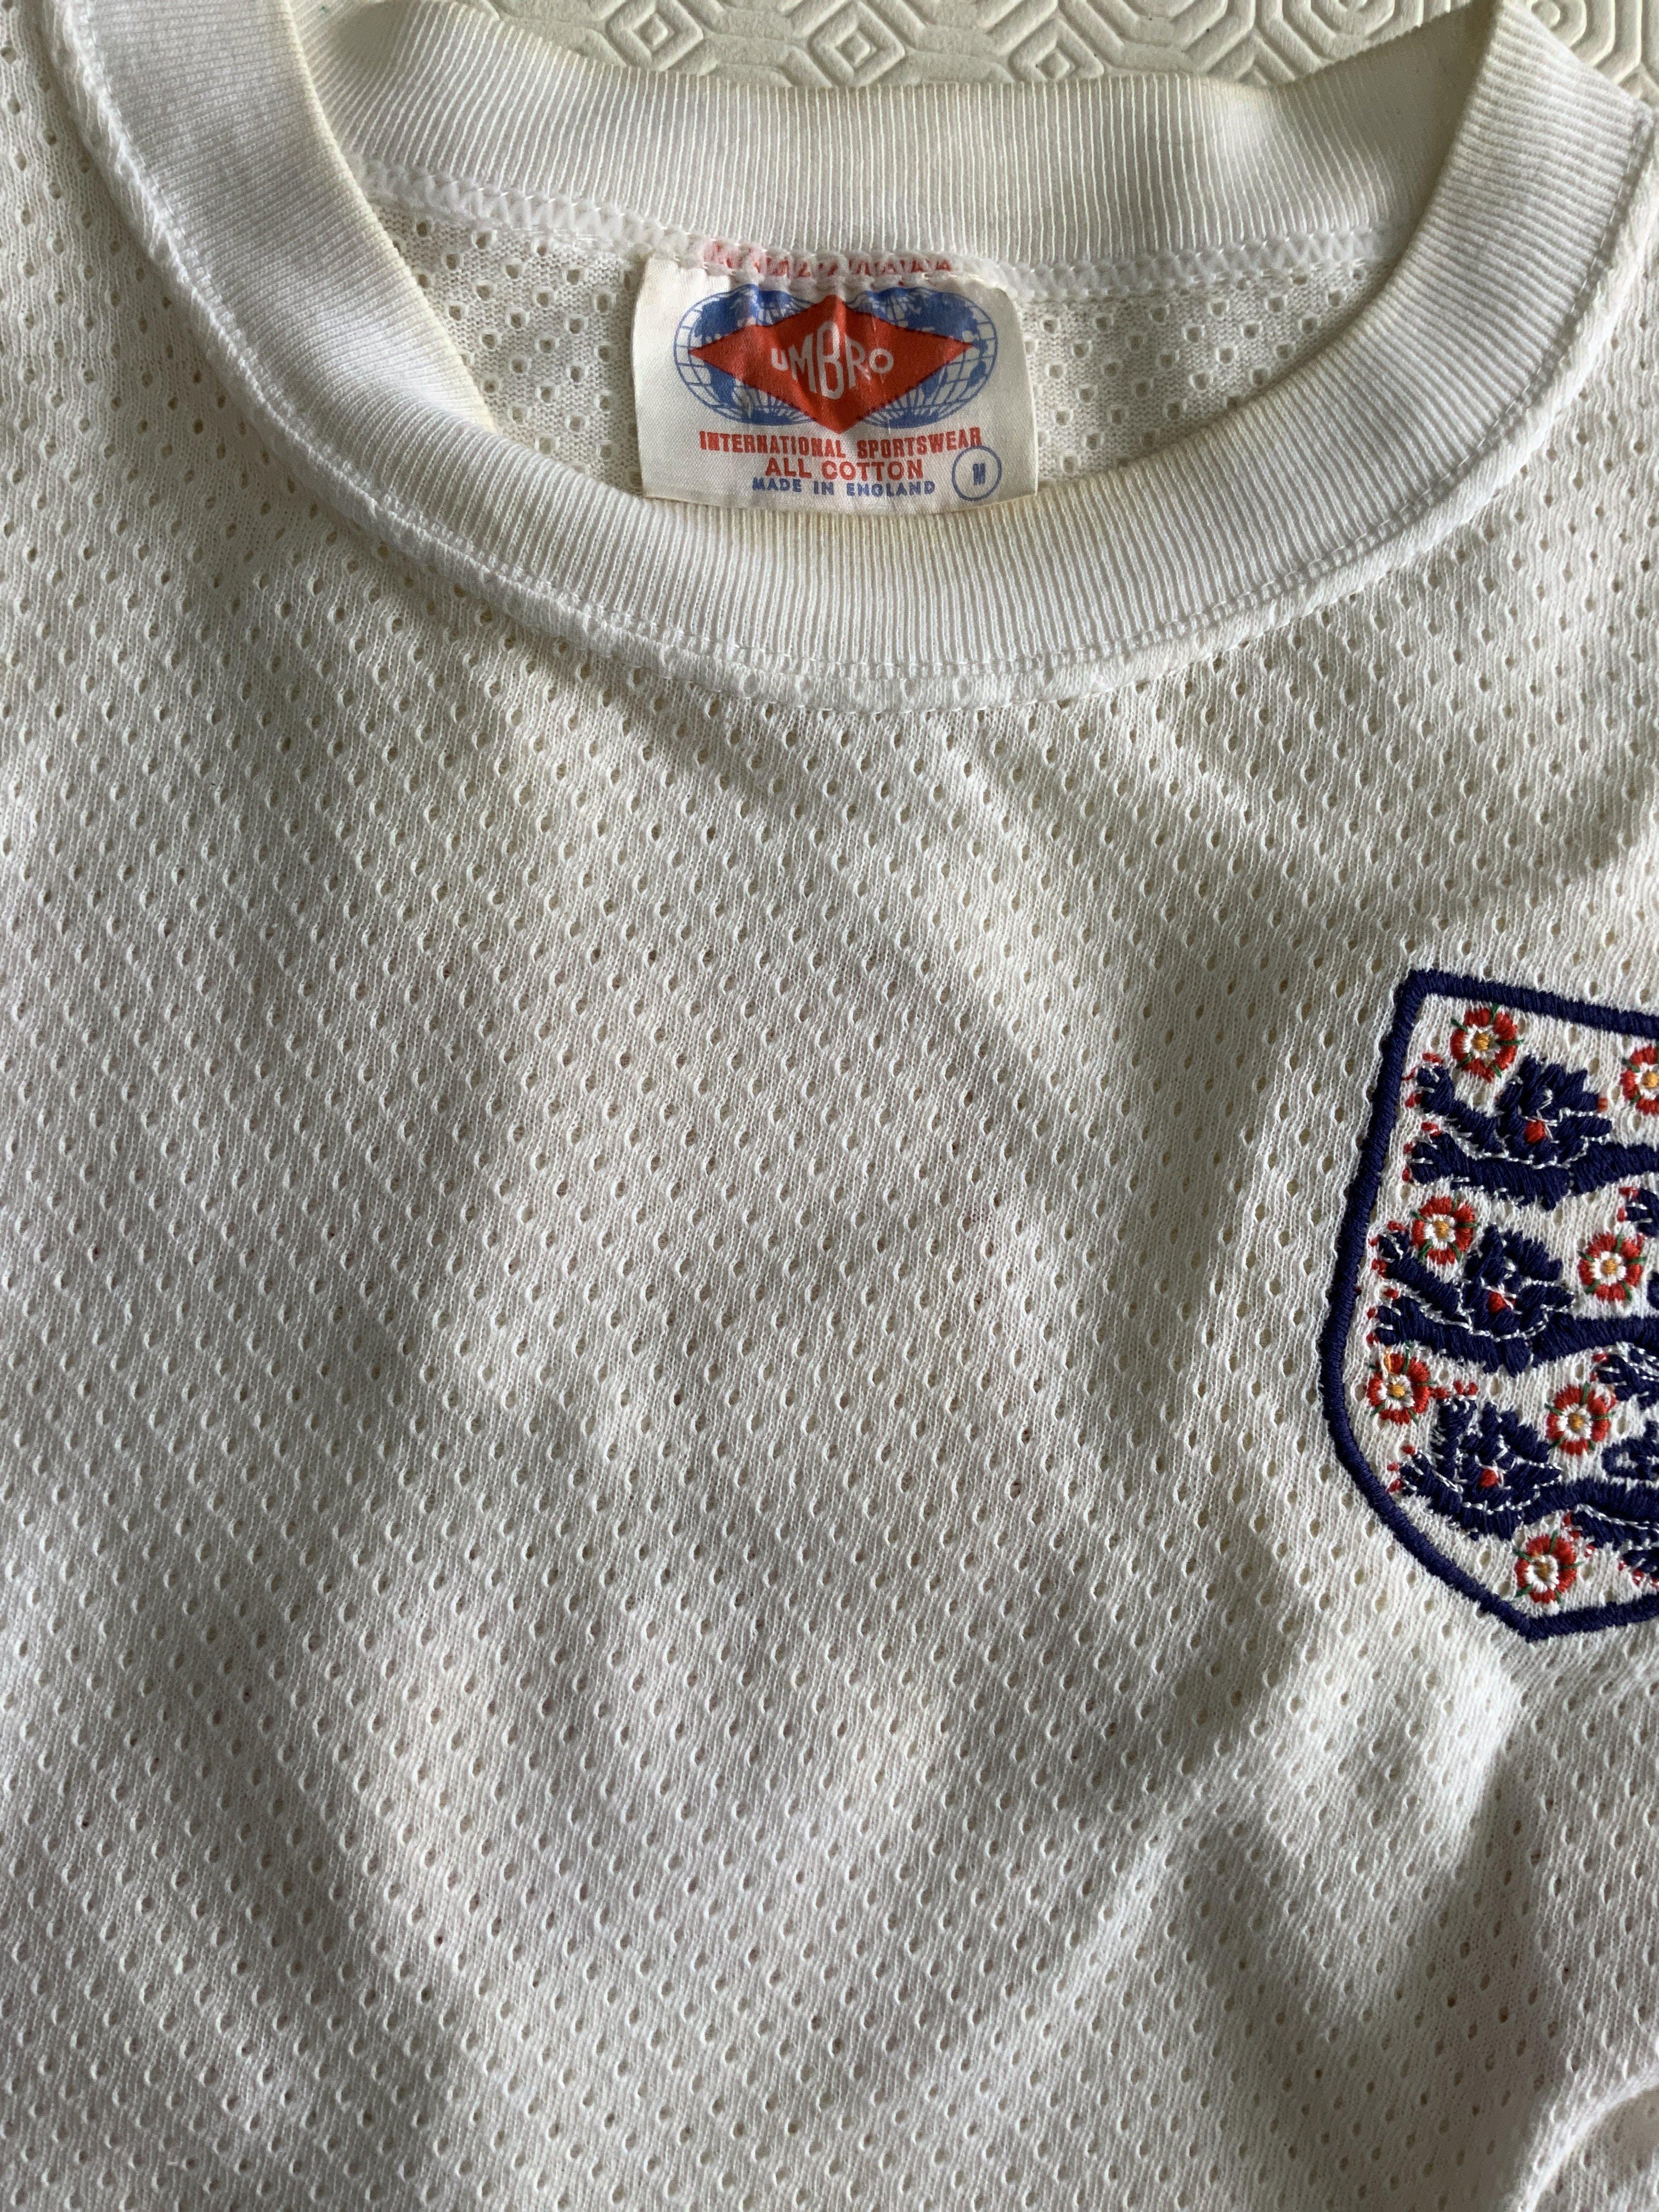 Nobby Stiles 1970 England World Cup Match Issued F - Image 3 of 5